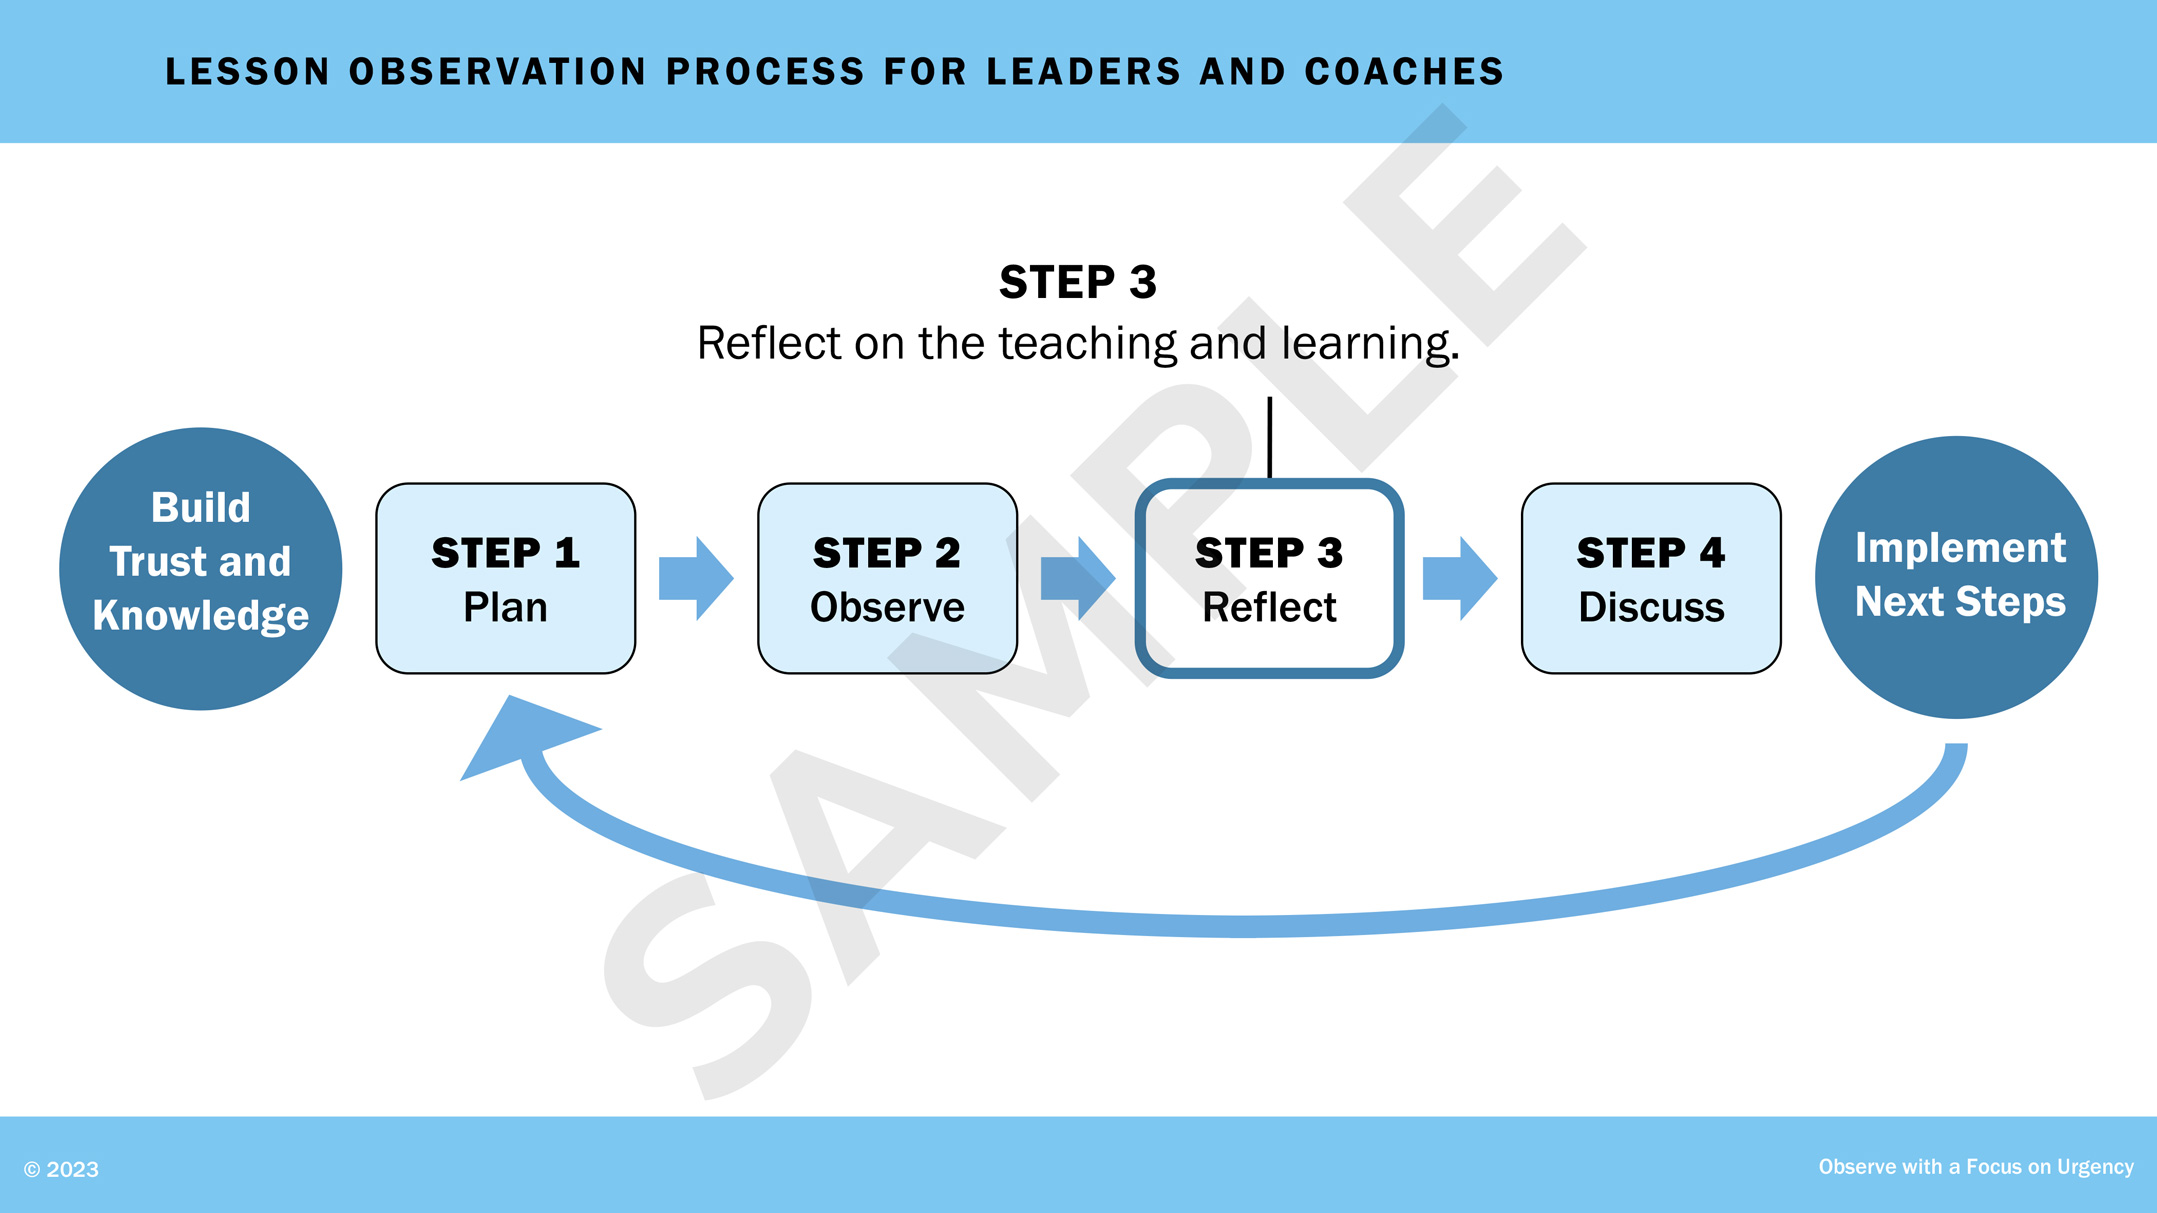 Slide from a PowerPoint presentation for a learning series for teachers. A flow chart shows the steps in the lesson observation process: build trust and knowledge, plan, observe, reflect, discuss, and implement next steps. The step of 'reflect' is highlighted.